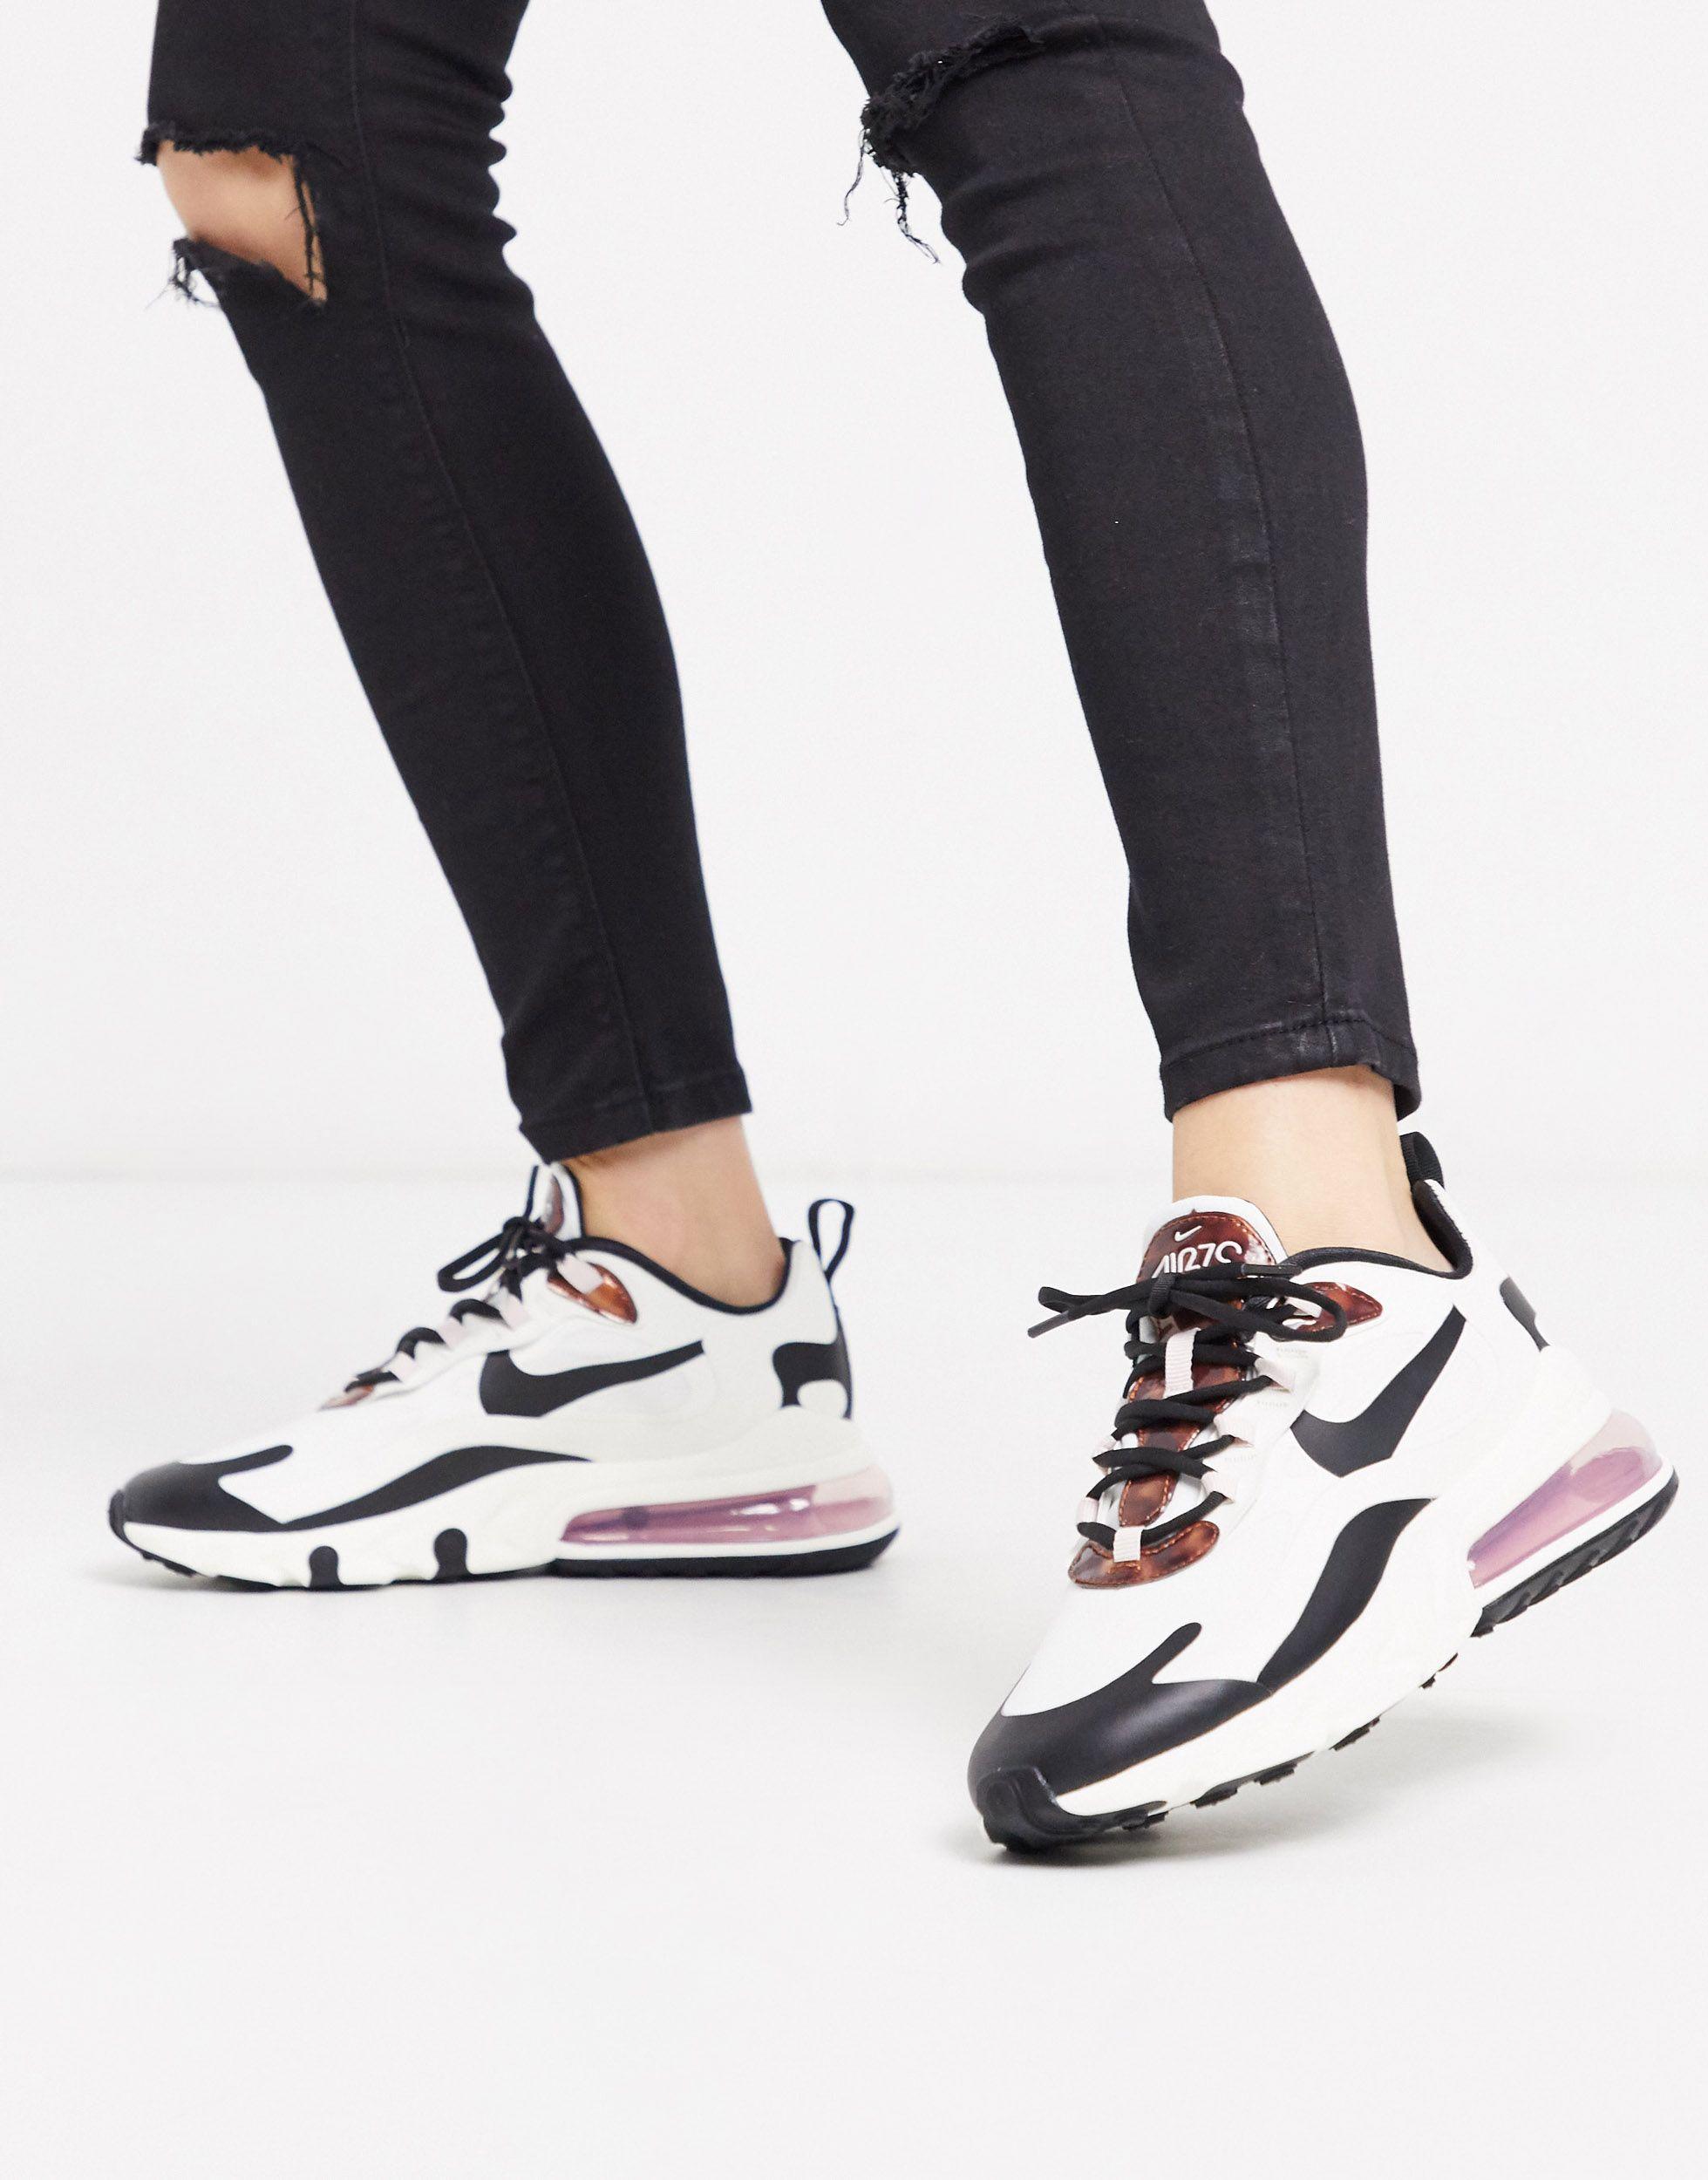 Nike Synthetic Air Max 270 React Tortoise Shell Shoe | Lyst